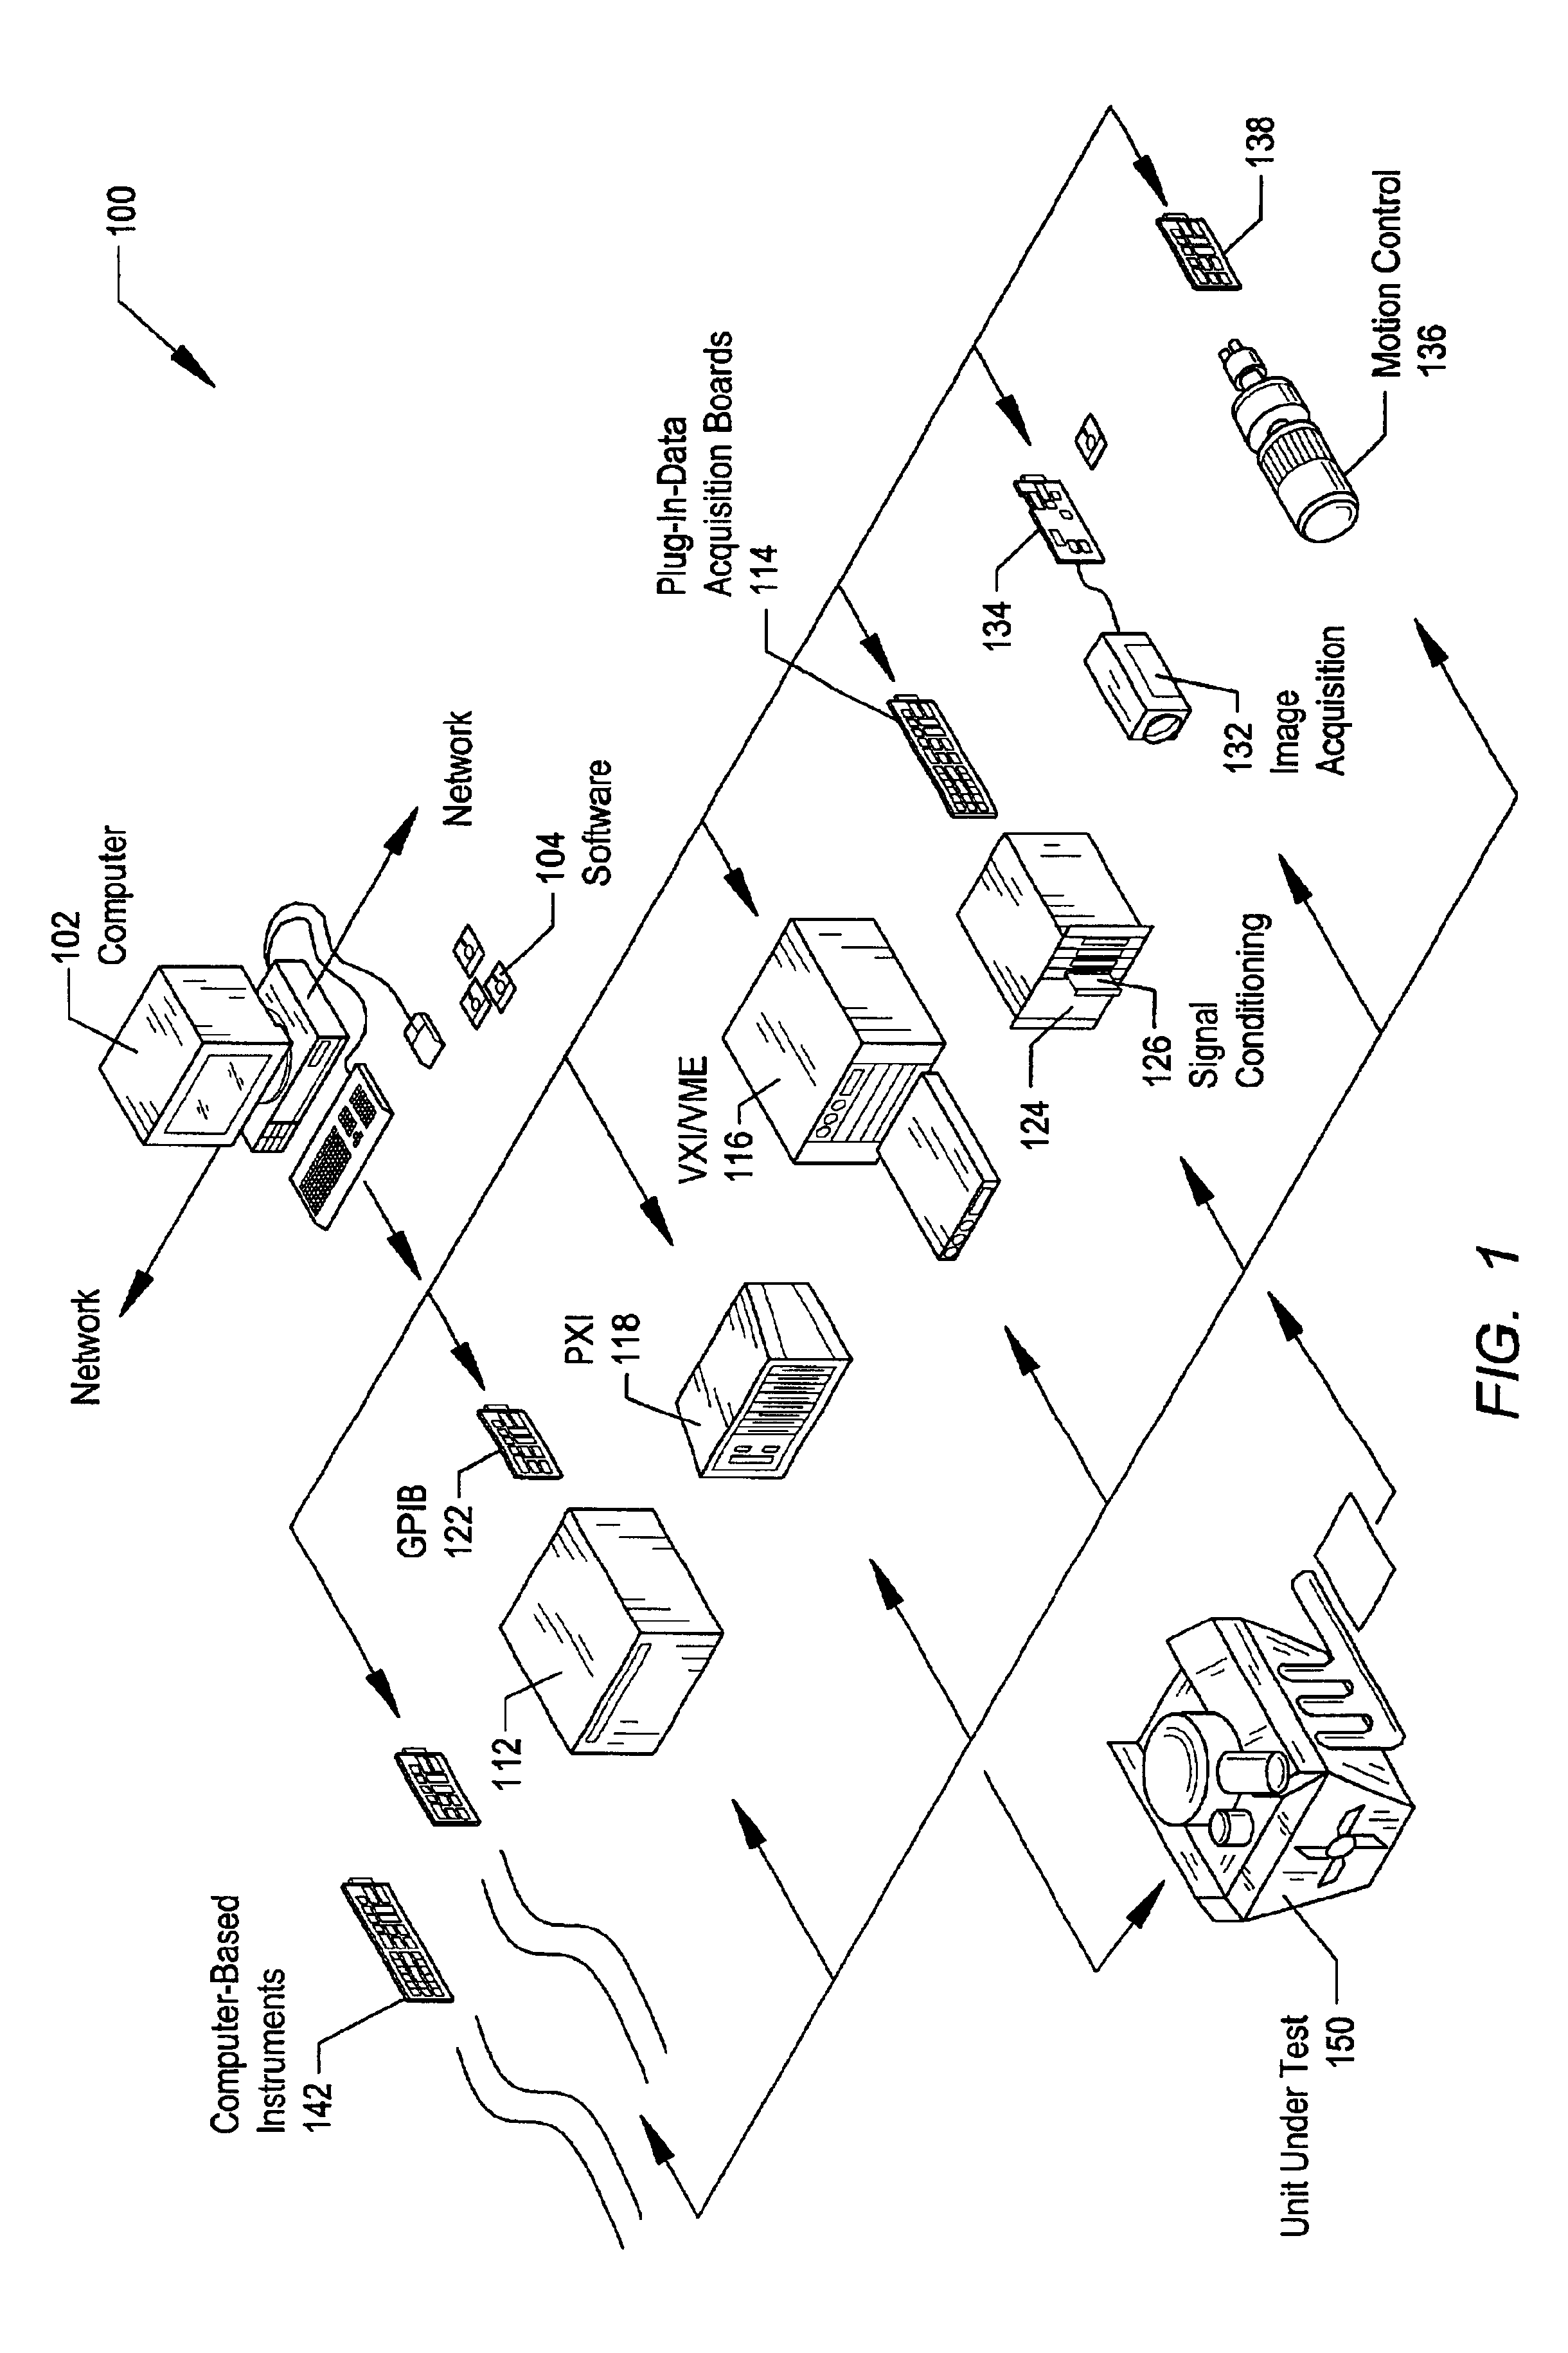 System and method for testing a group of related products